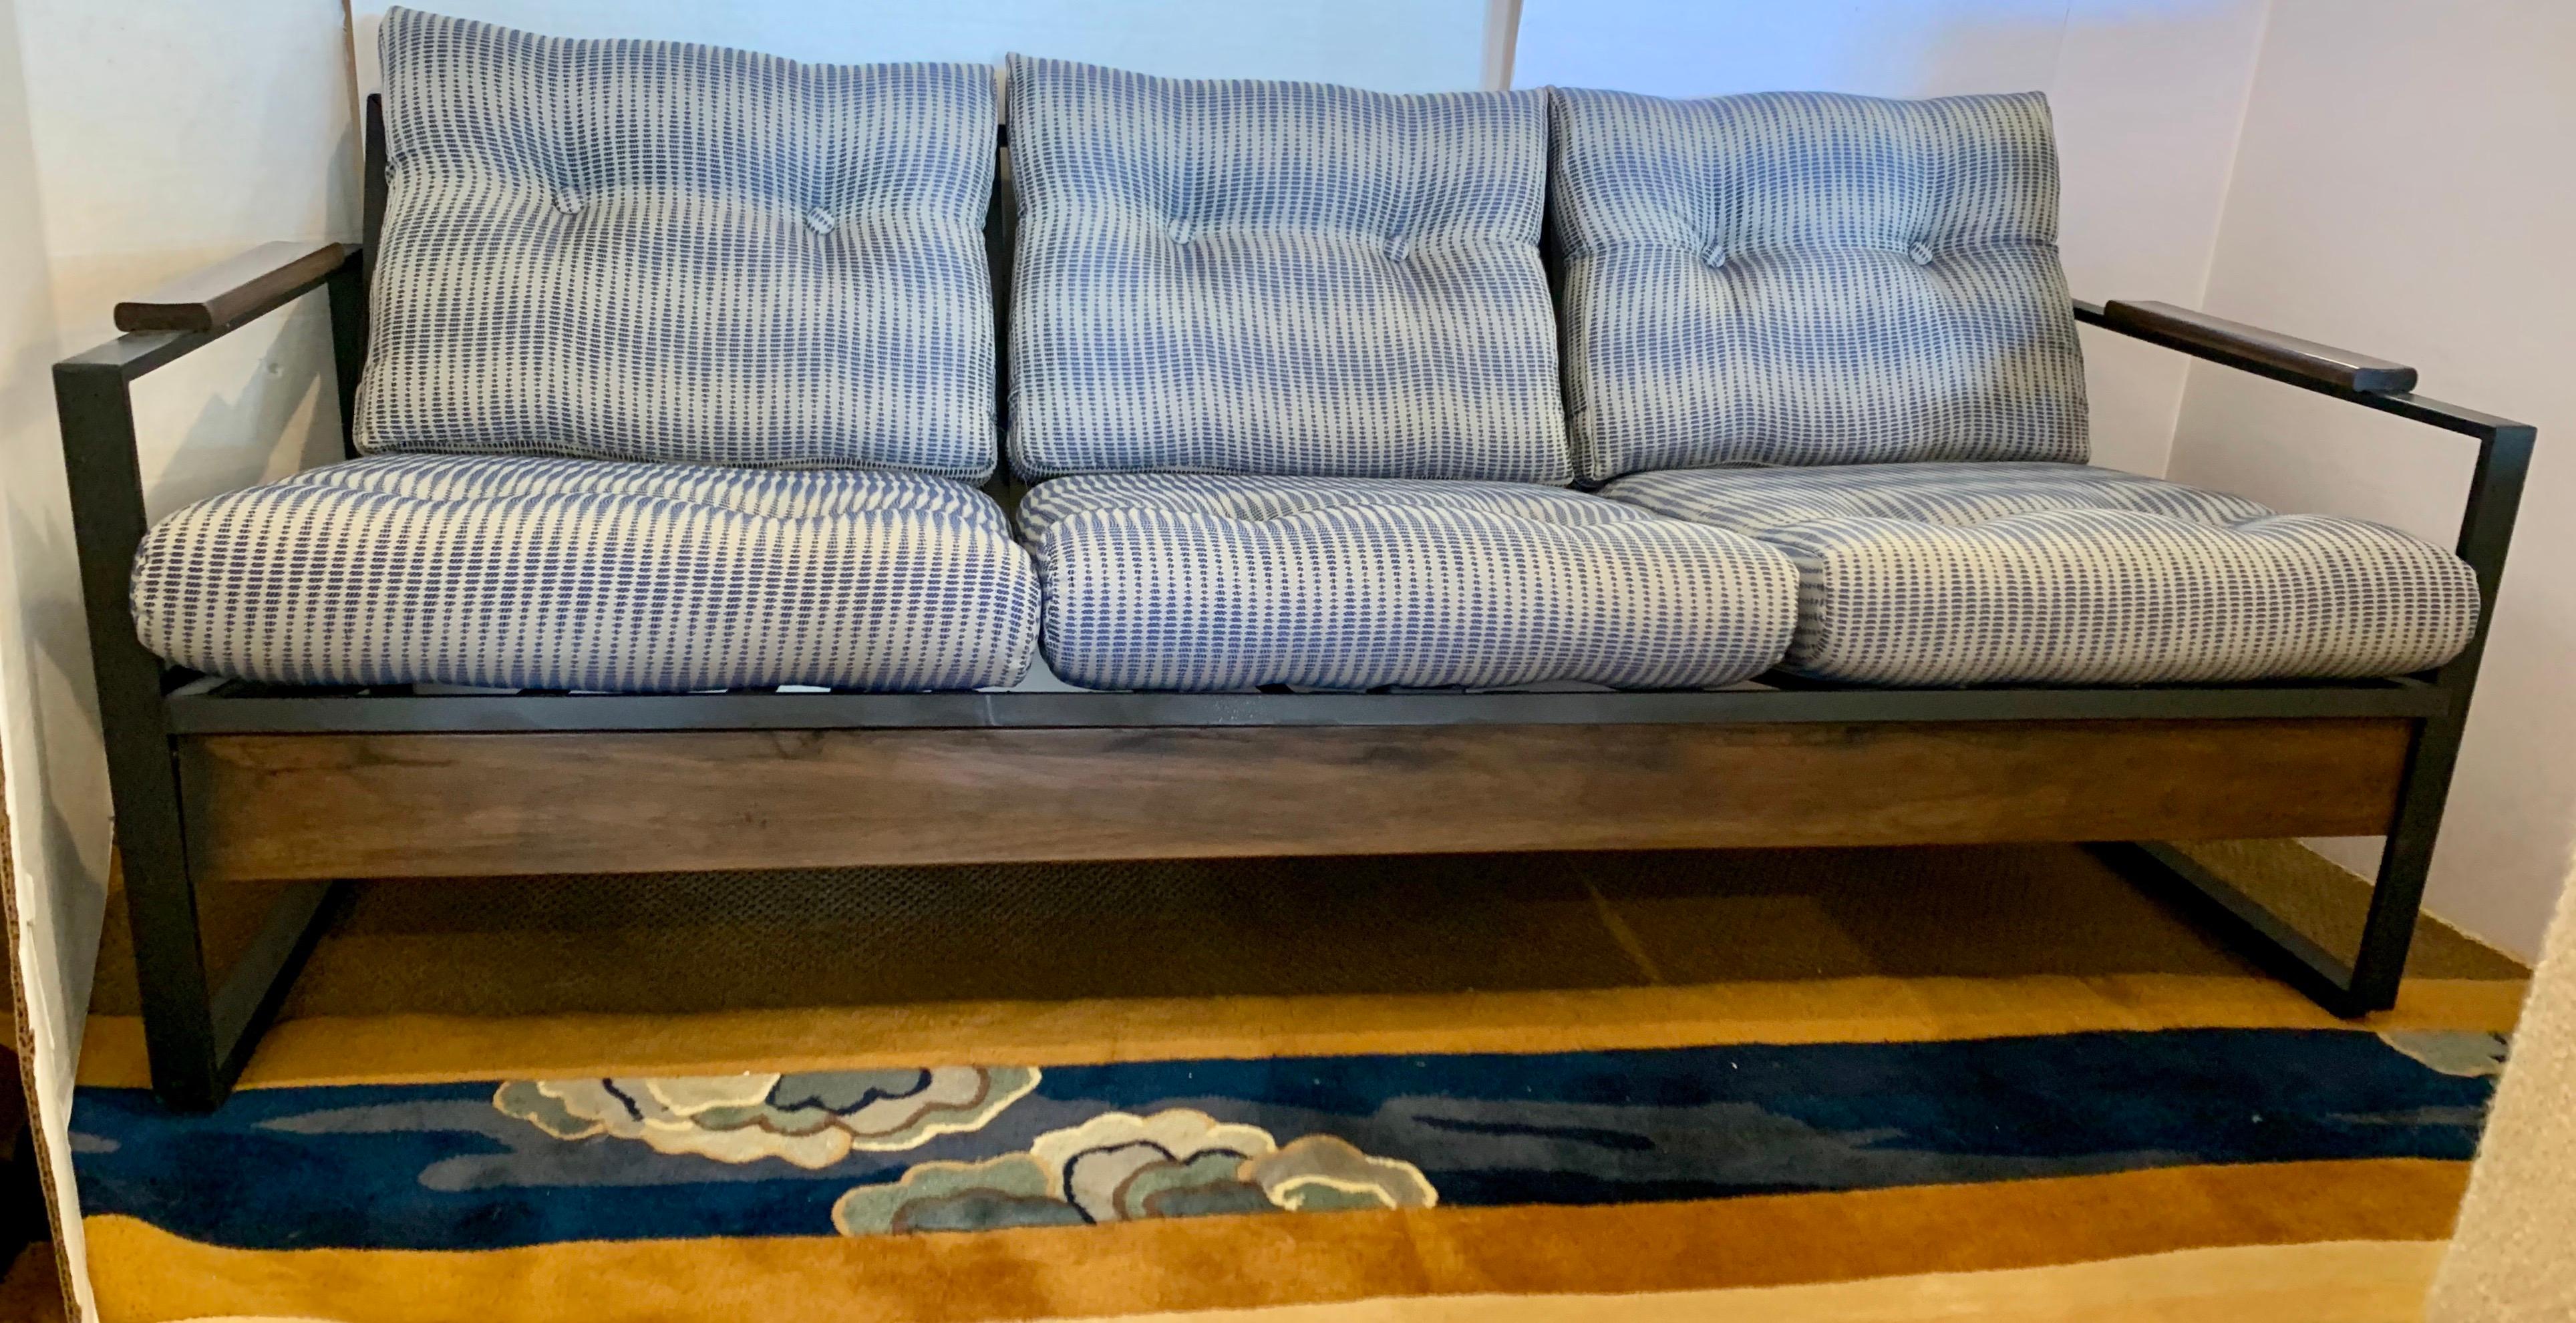 Newly reupholstered Milo Baughman style sofa that measured just under six feet wide and sits three people. An iconic midcentury piece that features a blue and off-white color scheme on the fabric and black metal and wood on the frame. What makes